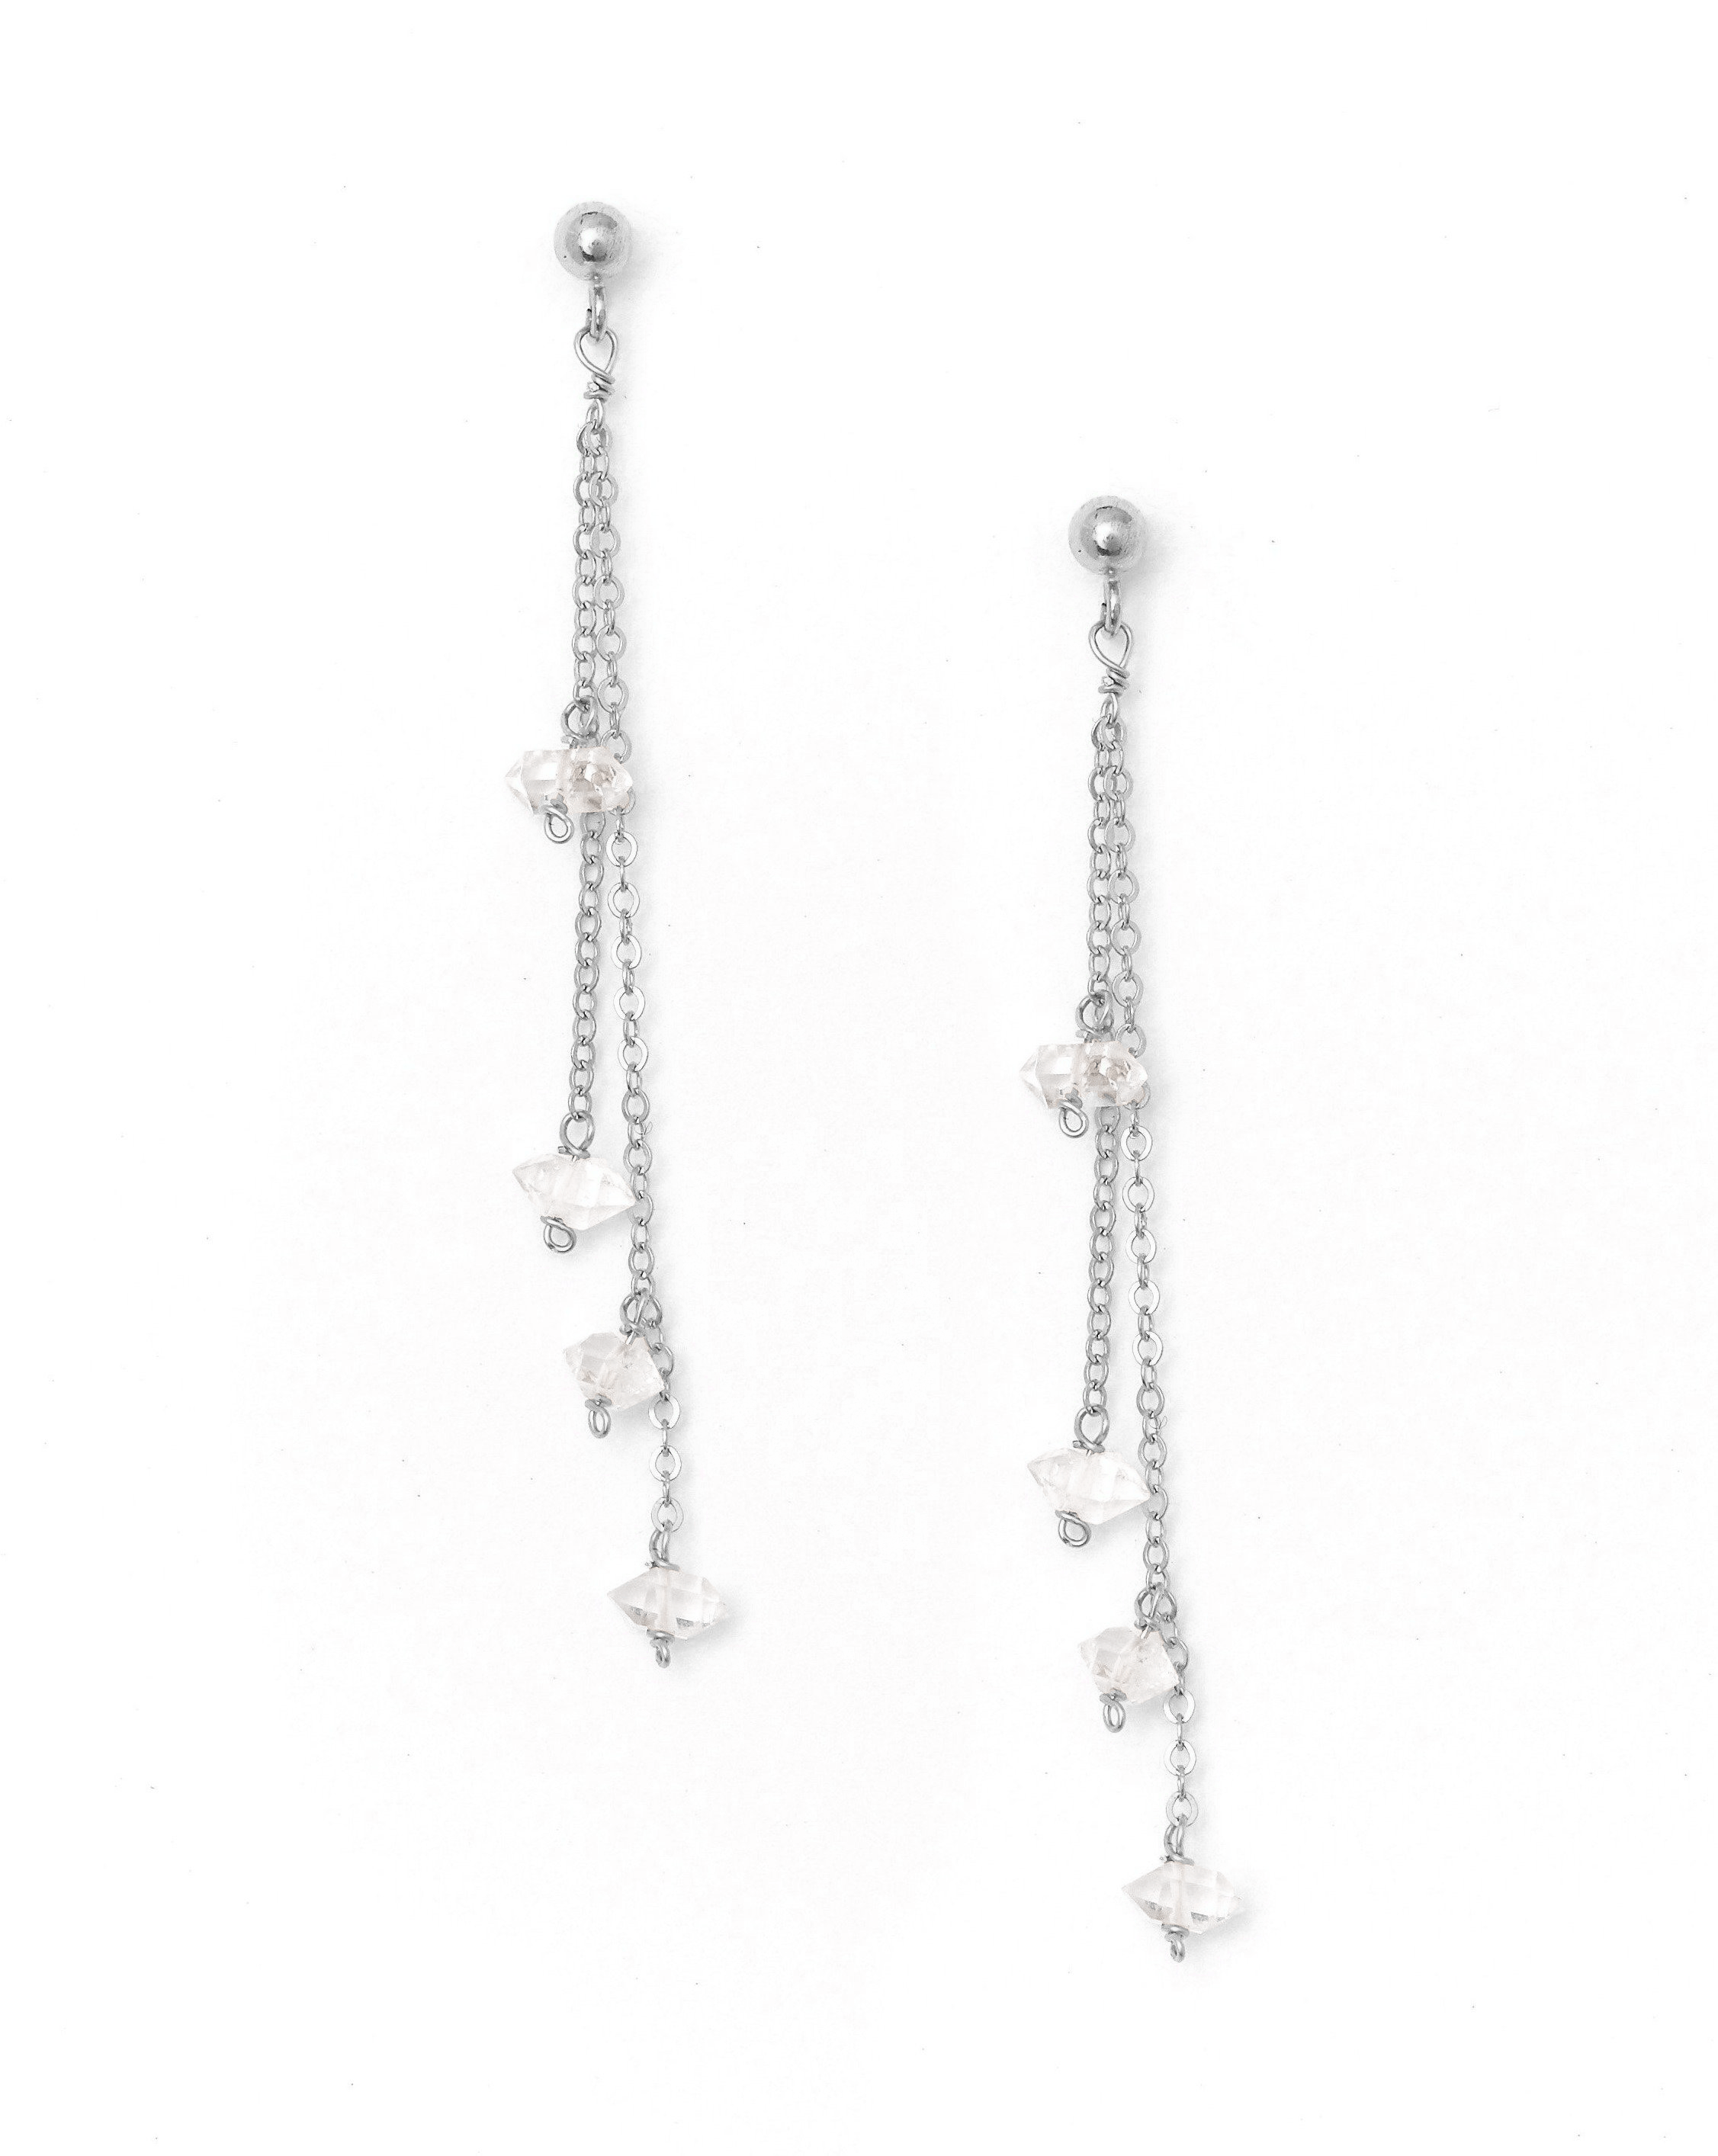 Rocio Herkimer Earrings by KOZAKH. 3mm Ball stud earrings with 1 1/2 inches long front drop, crafted in Sterling Silver, featuring Herkimer Diamonds.